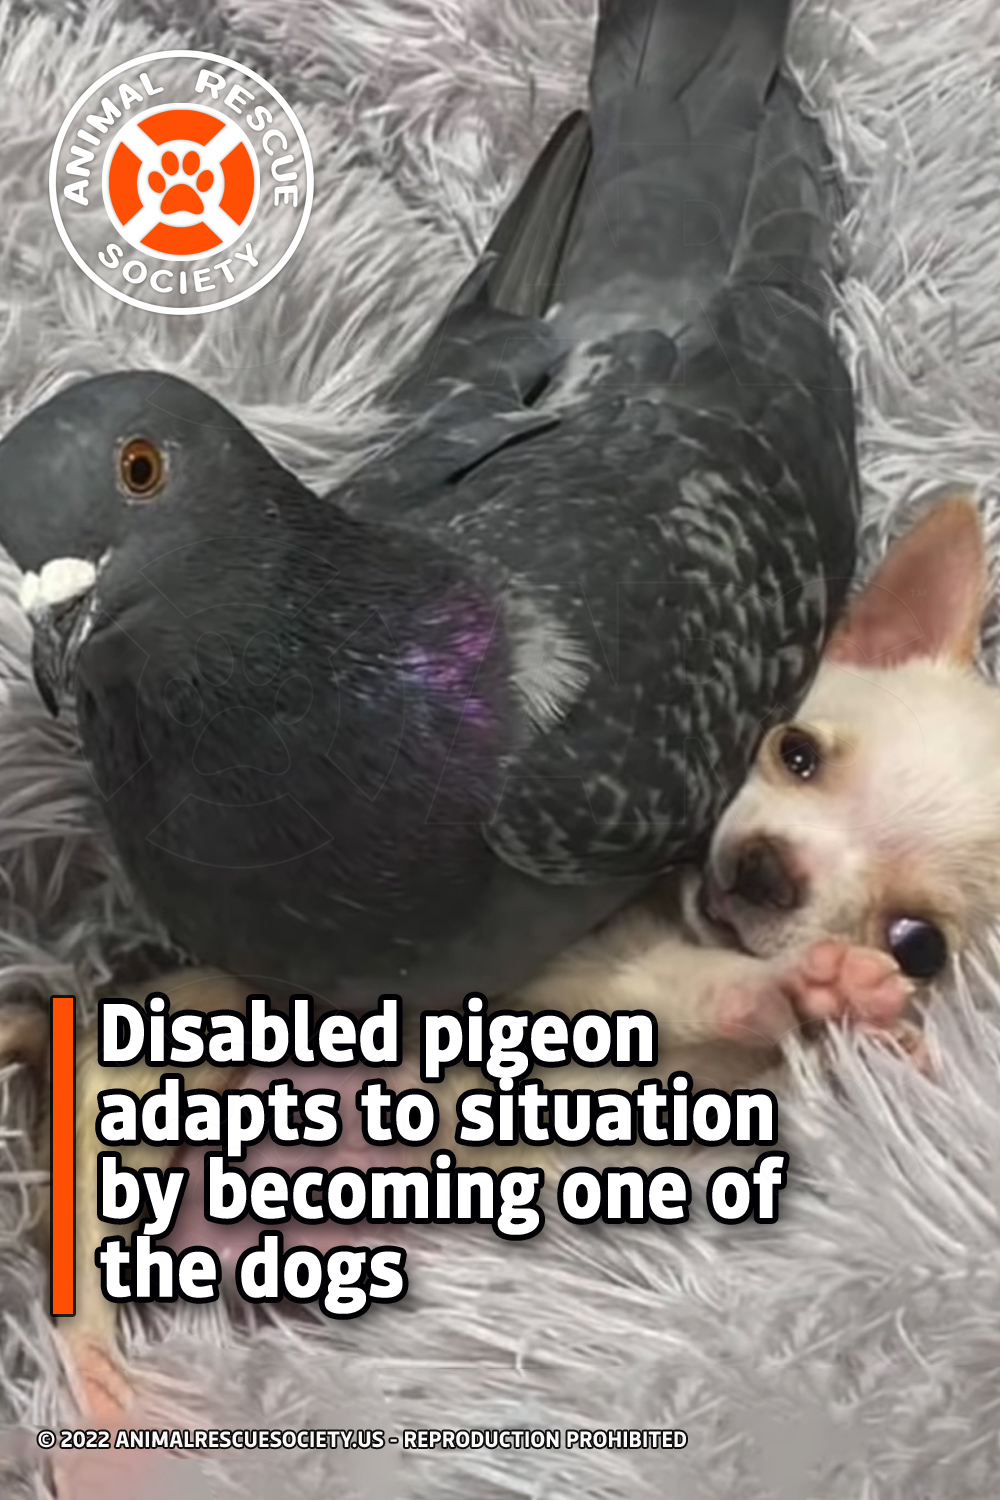 Disabled pigeon adapts to situation by becoming one of the dogs